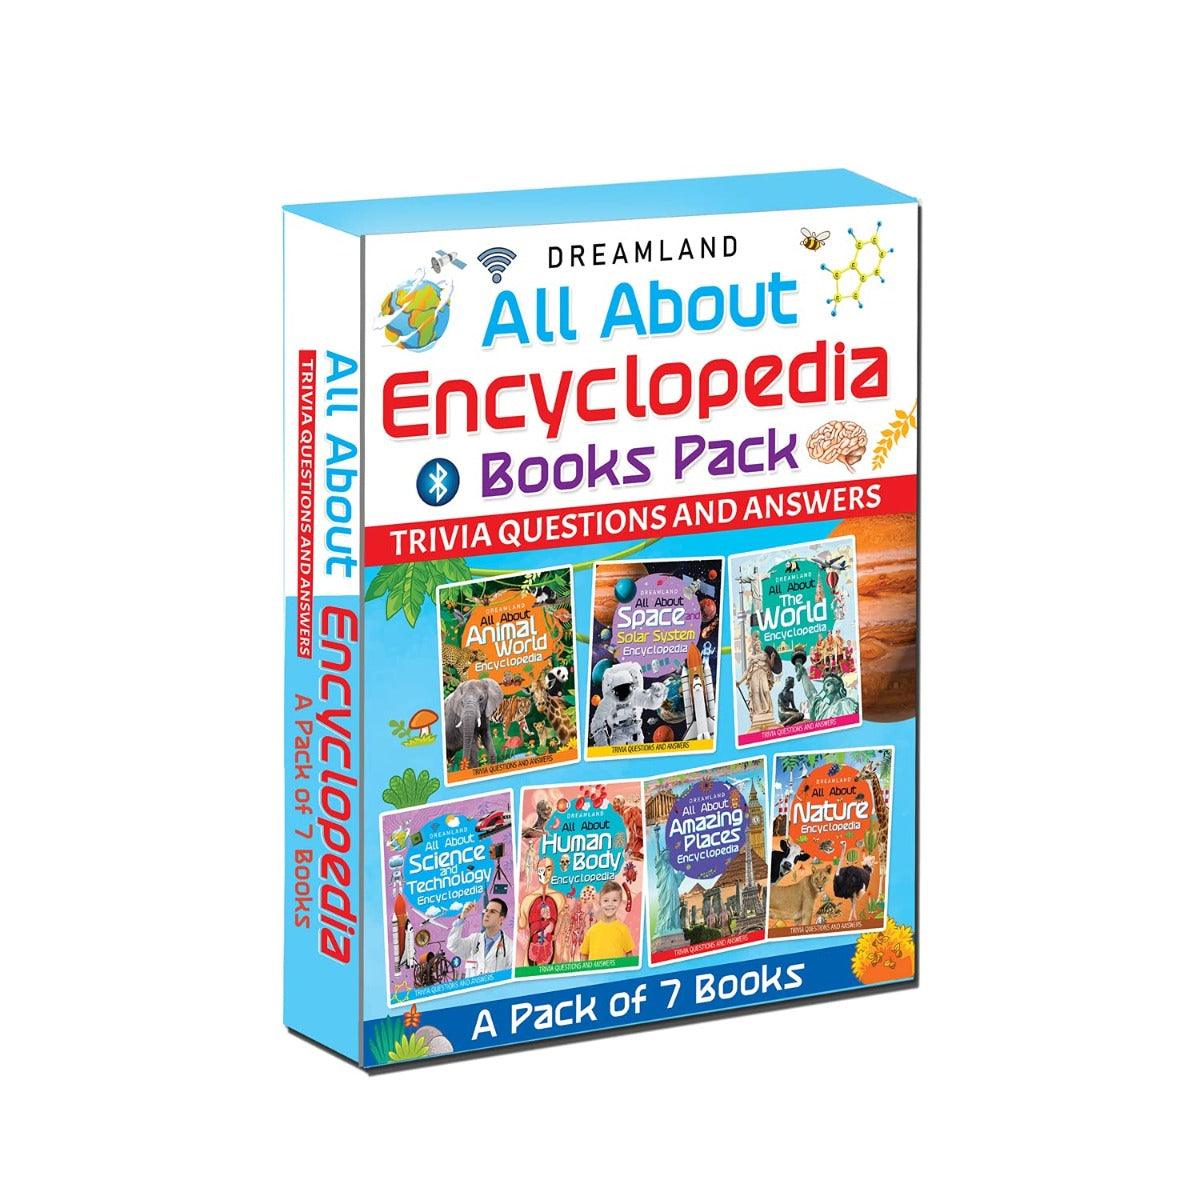 Dreamland Children Encyclopedia Books Pack - A Reference Book For Kids (English)